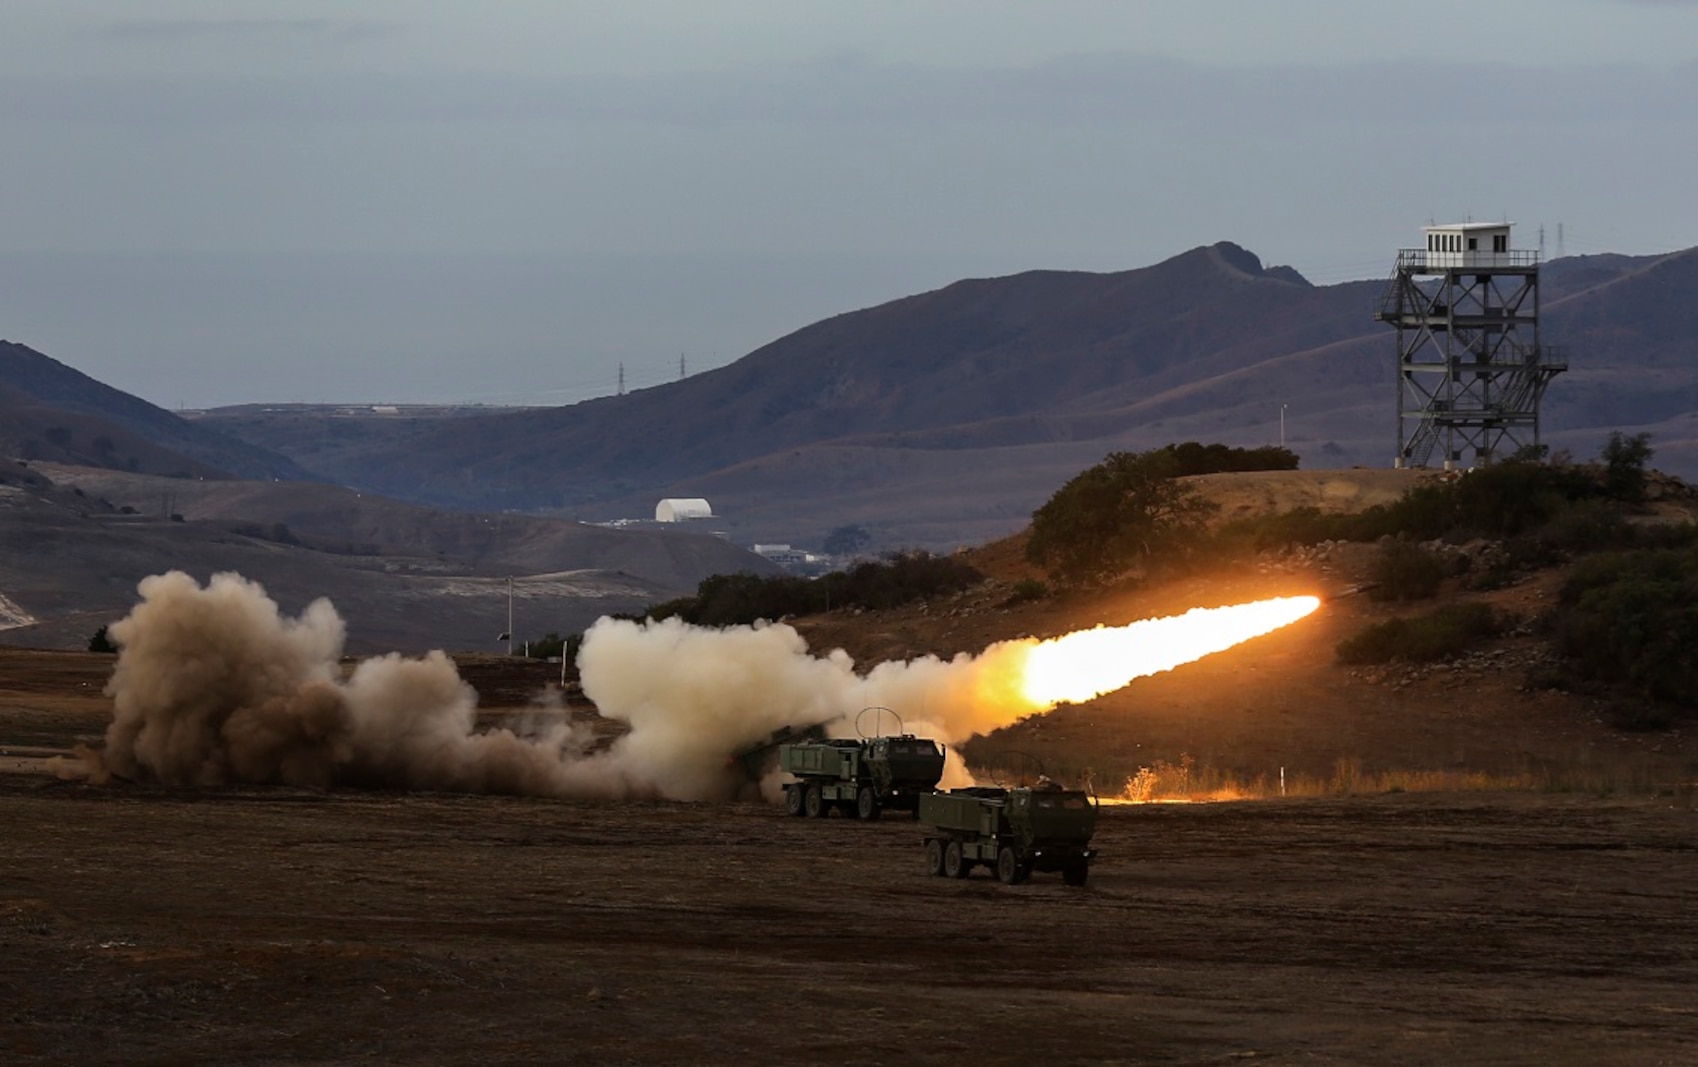 Marines fire a High-Mobility Artillery Rocket System in support of Steel Knight aboard Marine Corps Base Camp Pendleton, Calif., Dec. 4, 2015. Steel Knight is a 1st Marine Division led exercise which enables the Marines and sailors to operate in a realistic combined-arms environment to develop skill sets necessary to operate as a fully capable Marine Air Ground Task Force. The Marines are assigned to Battery Q, 5th Battalion, 11th Marine Regiment, 1st Mar. Div.